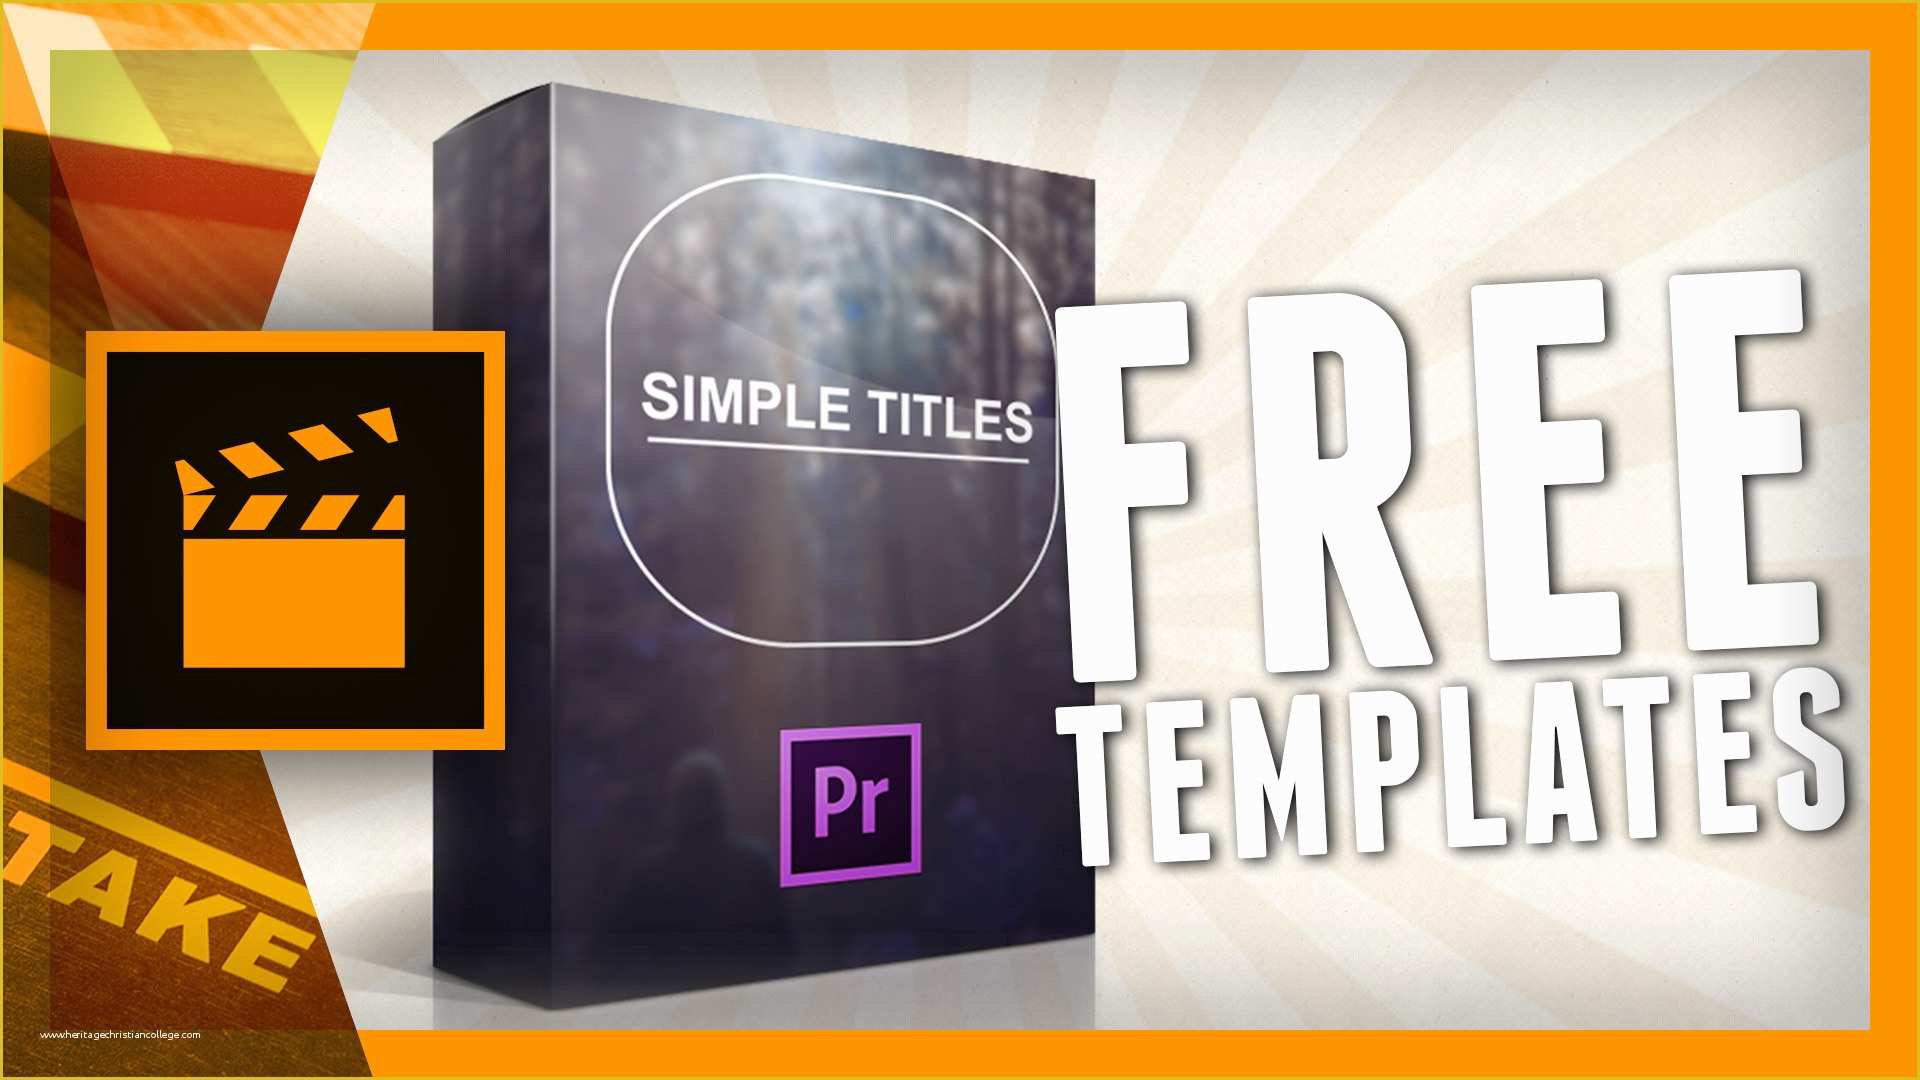 Free Premiere Pro Templates Of Simple Titles is Available for Premiere Pro Cs6